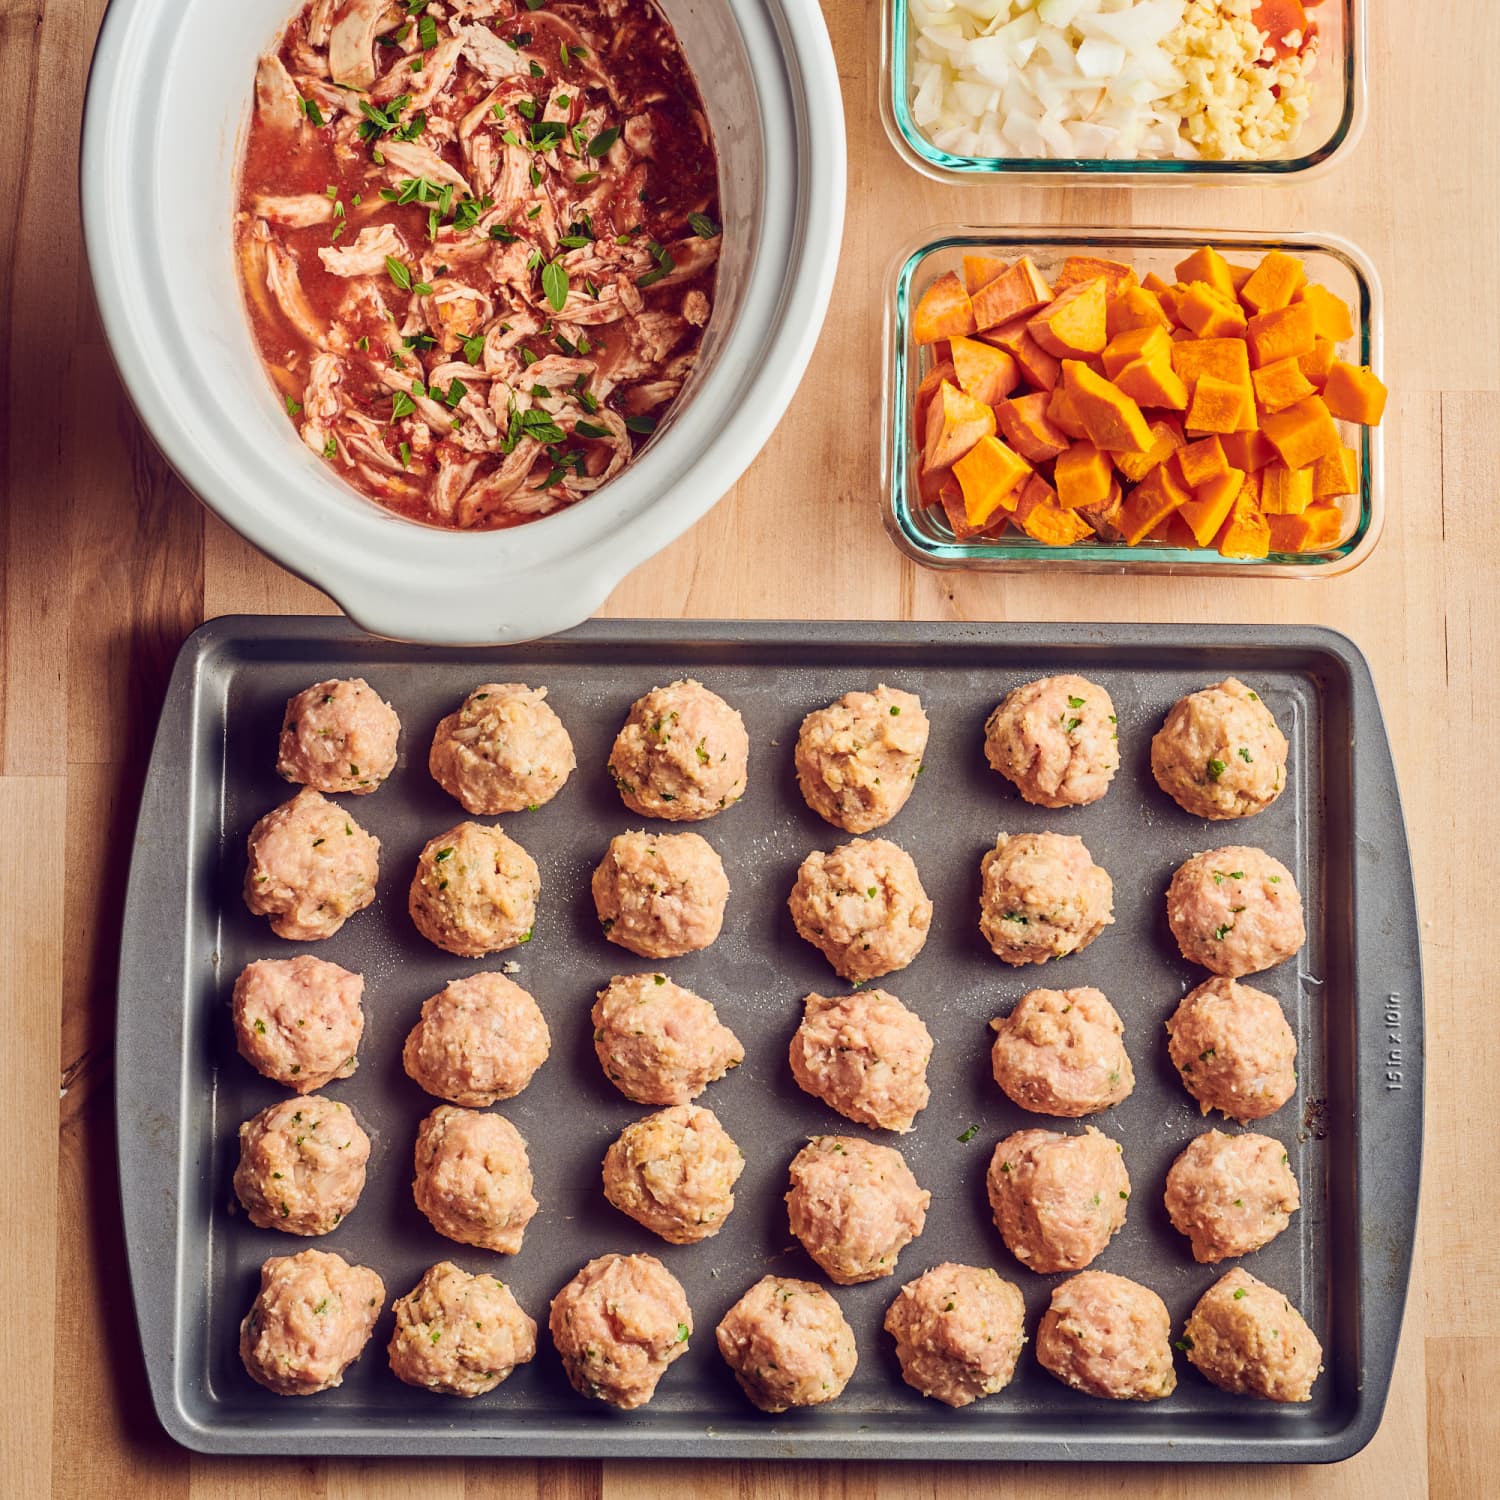 I Successfully Meal Prep Using These 12 Recipes, and Here's Why It Works